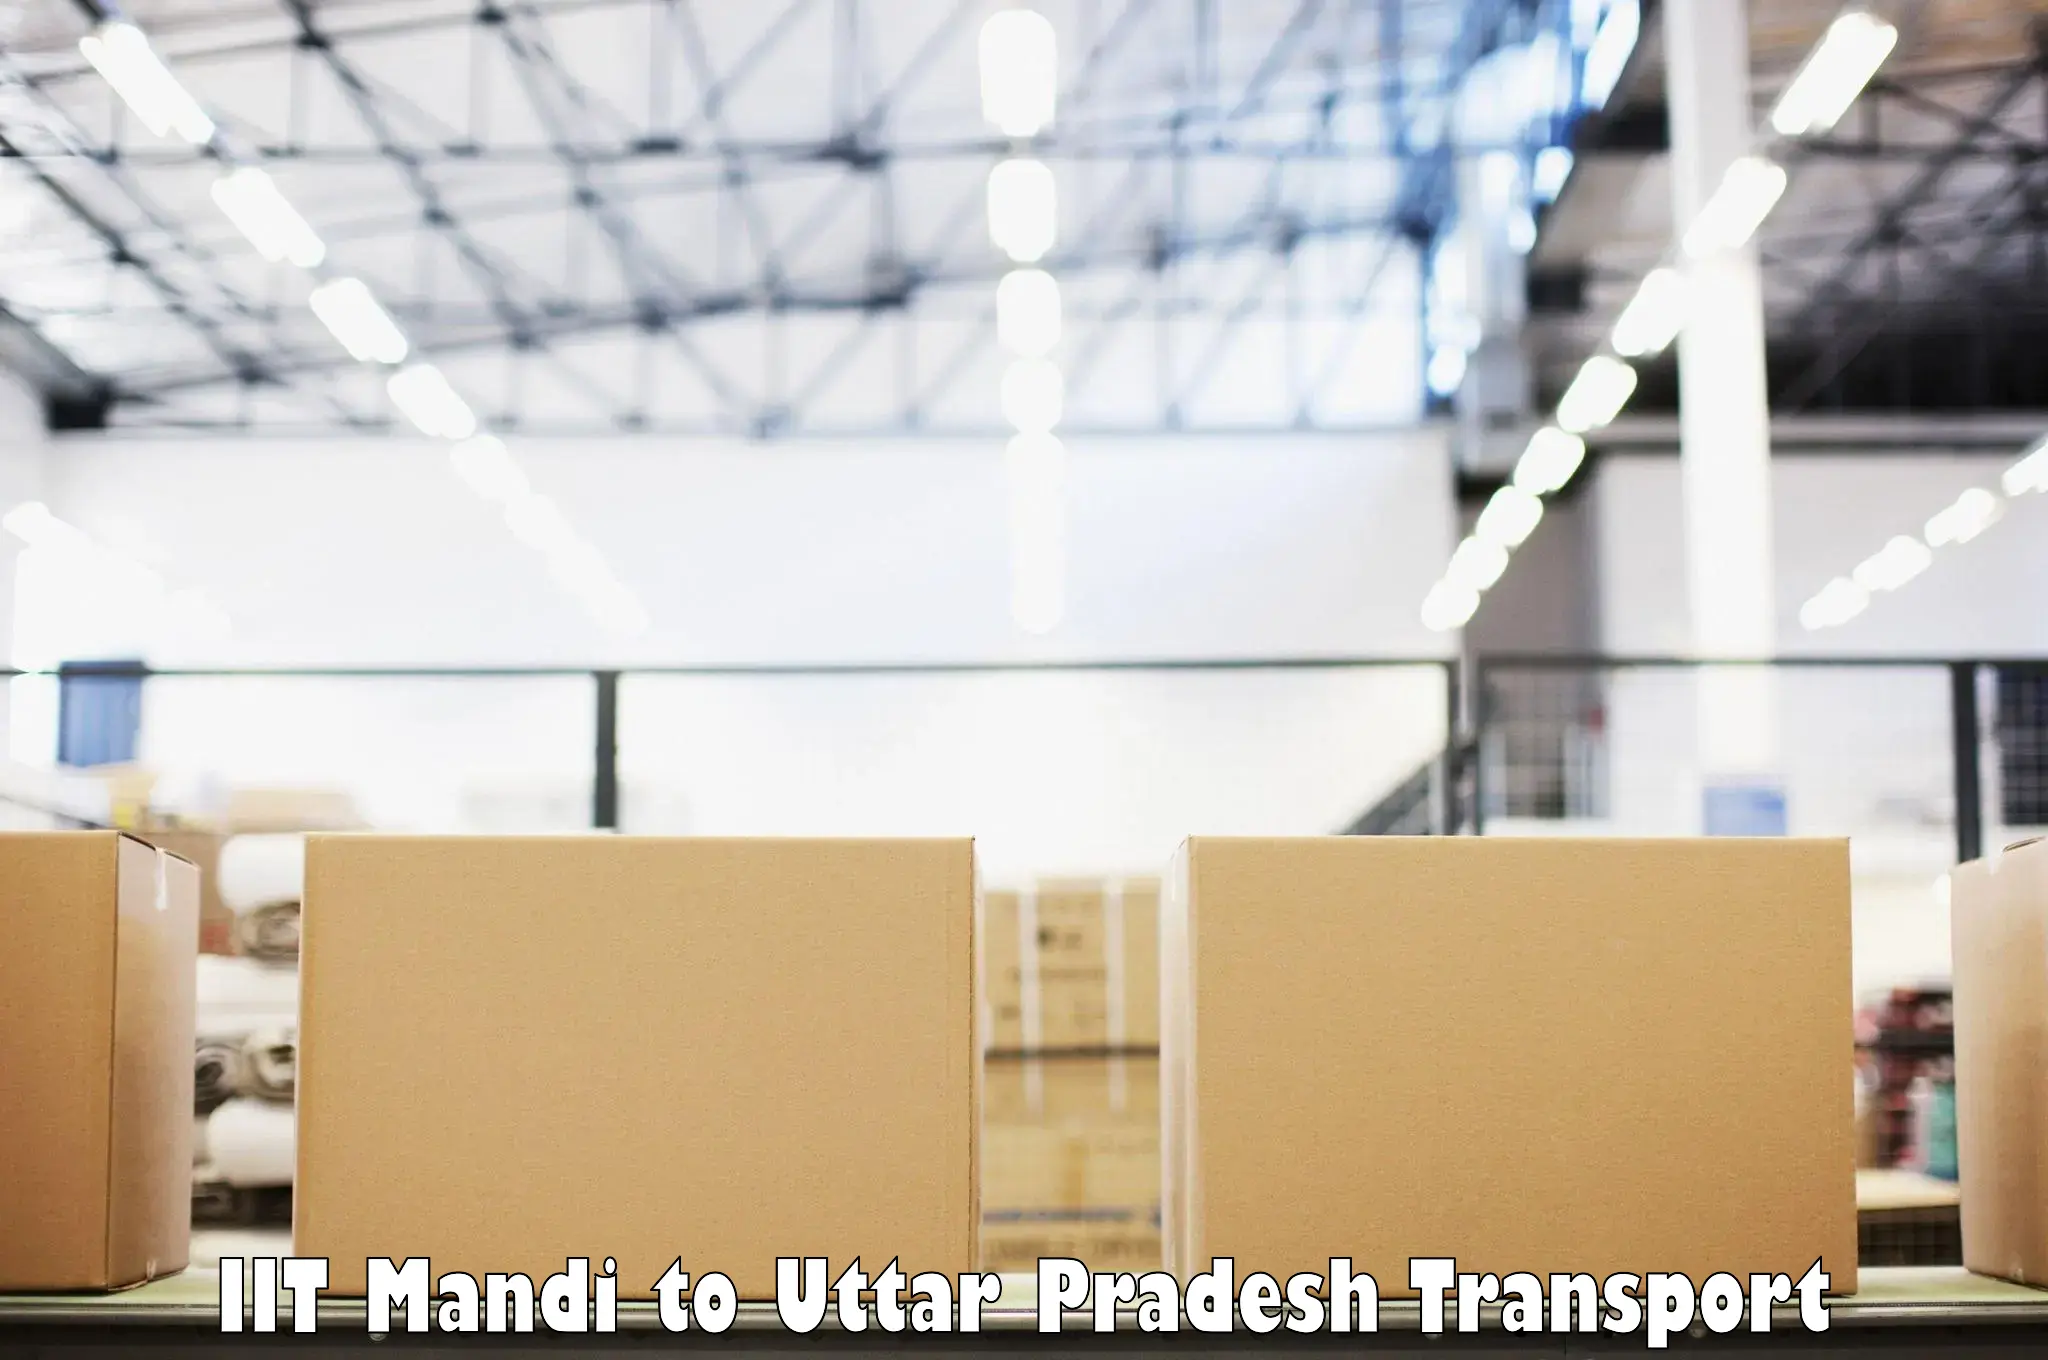 Commercial transport service IIT Mandi to Utraula